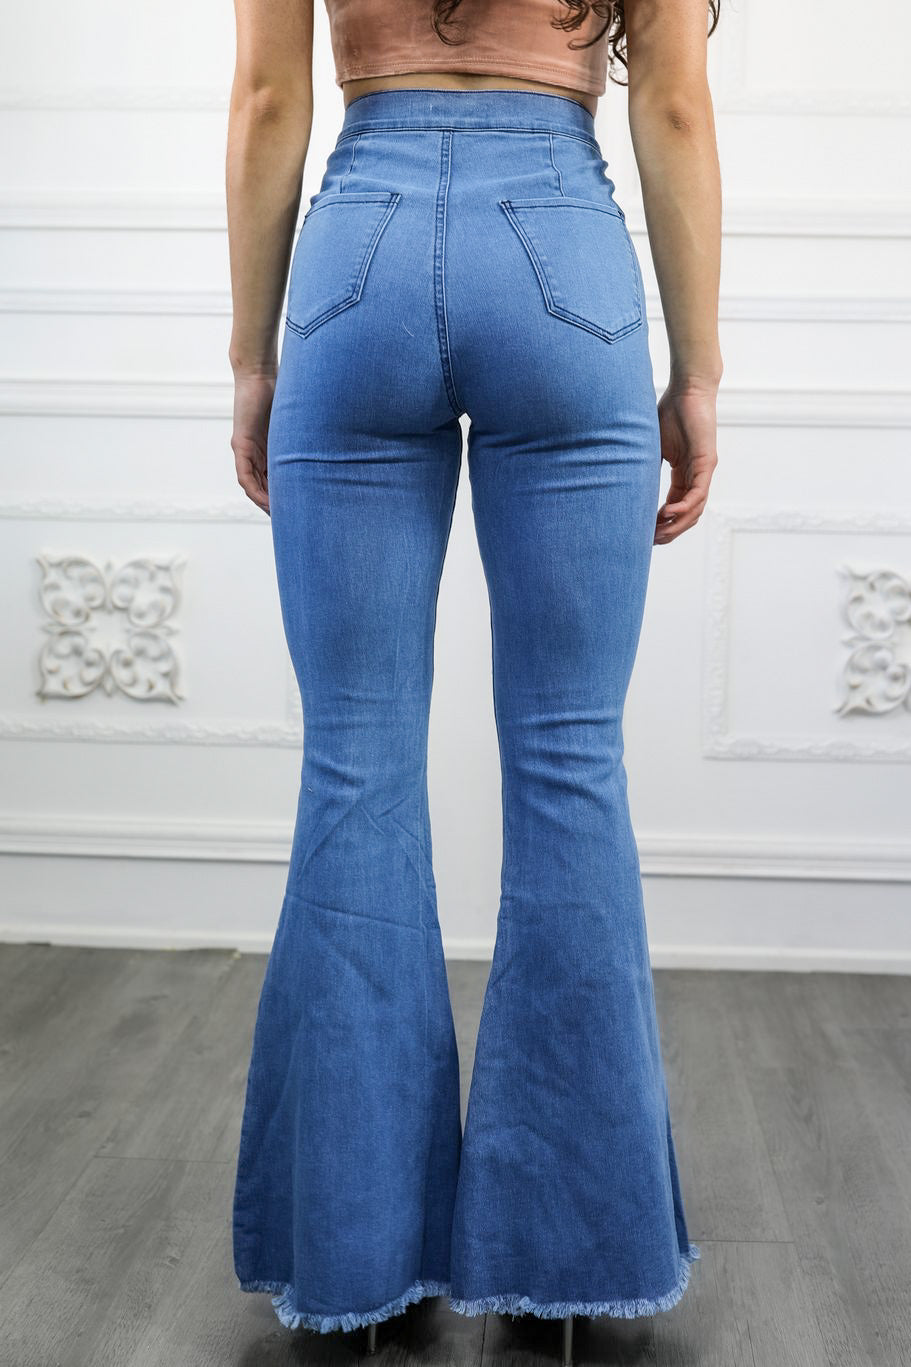 Classic Bell Bottom Jeans without Front Pockets